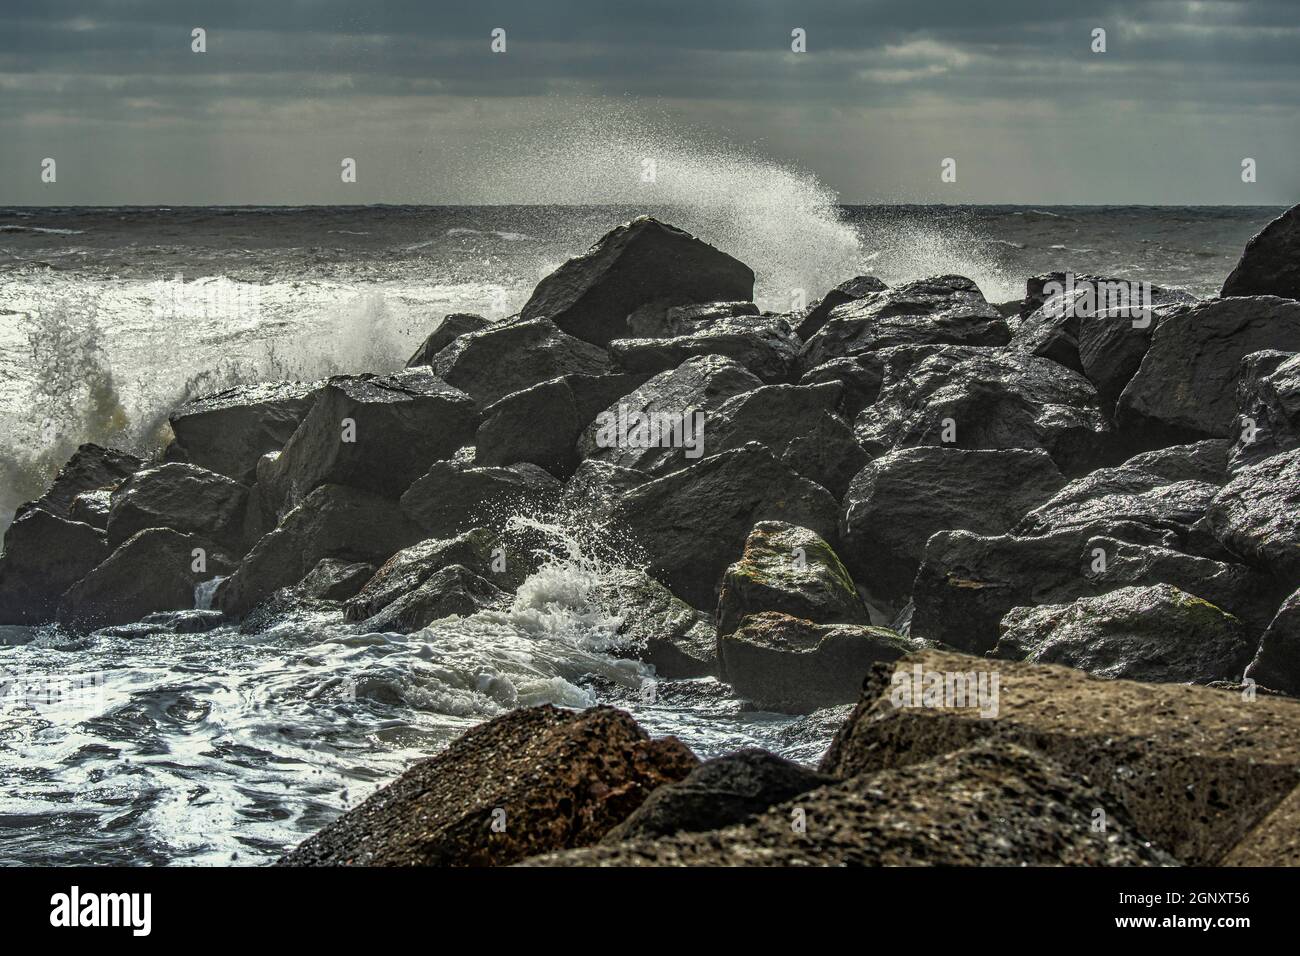 The north sea crashes against the rocks with high waves and foam spray. North Sea, Denmark, Europe Stock Photo